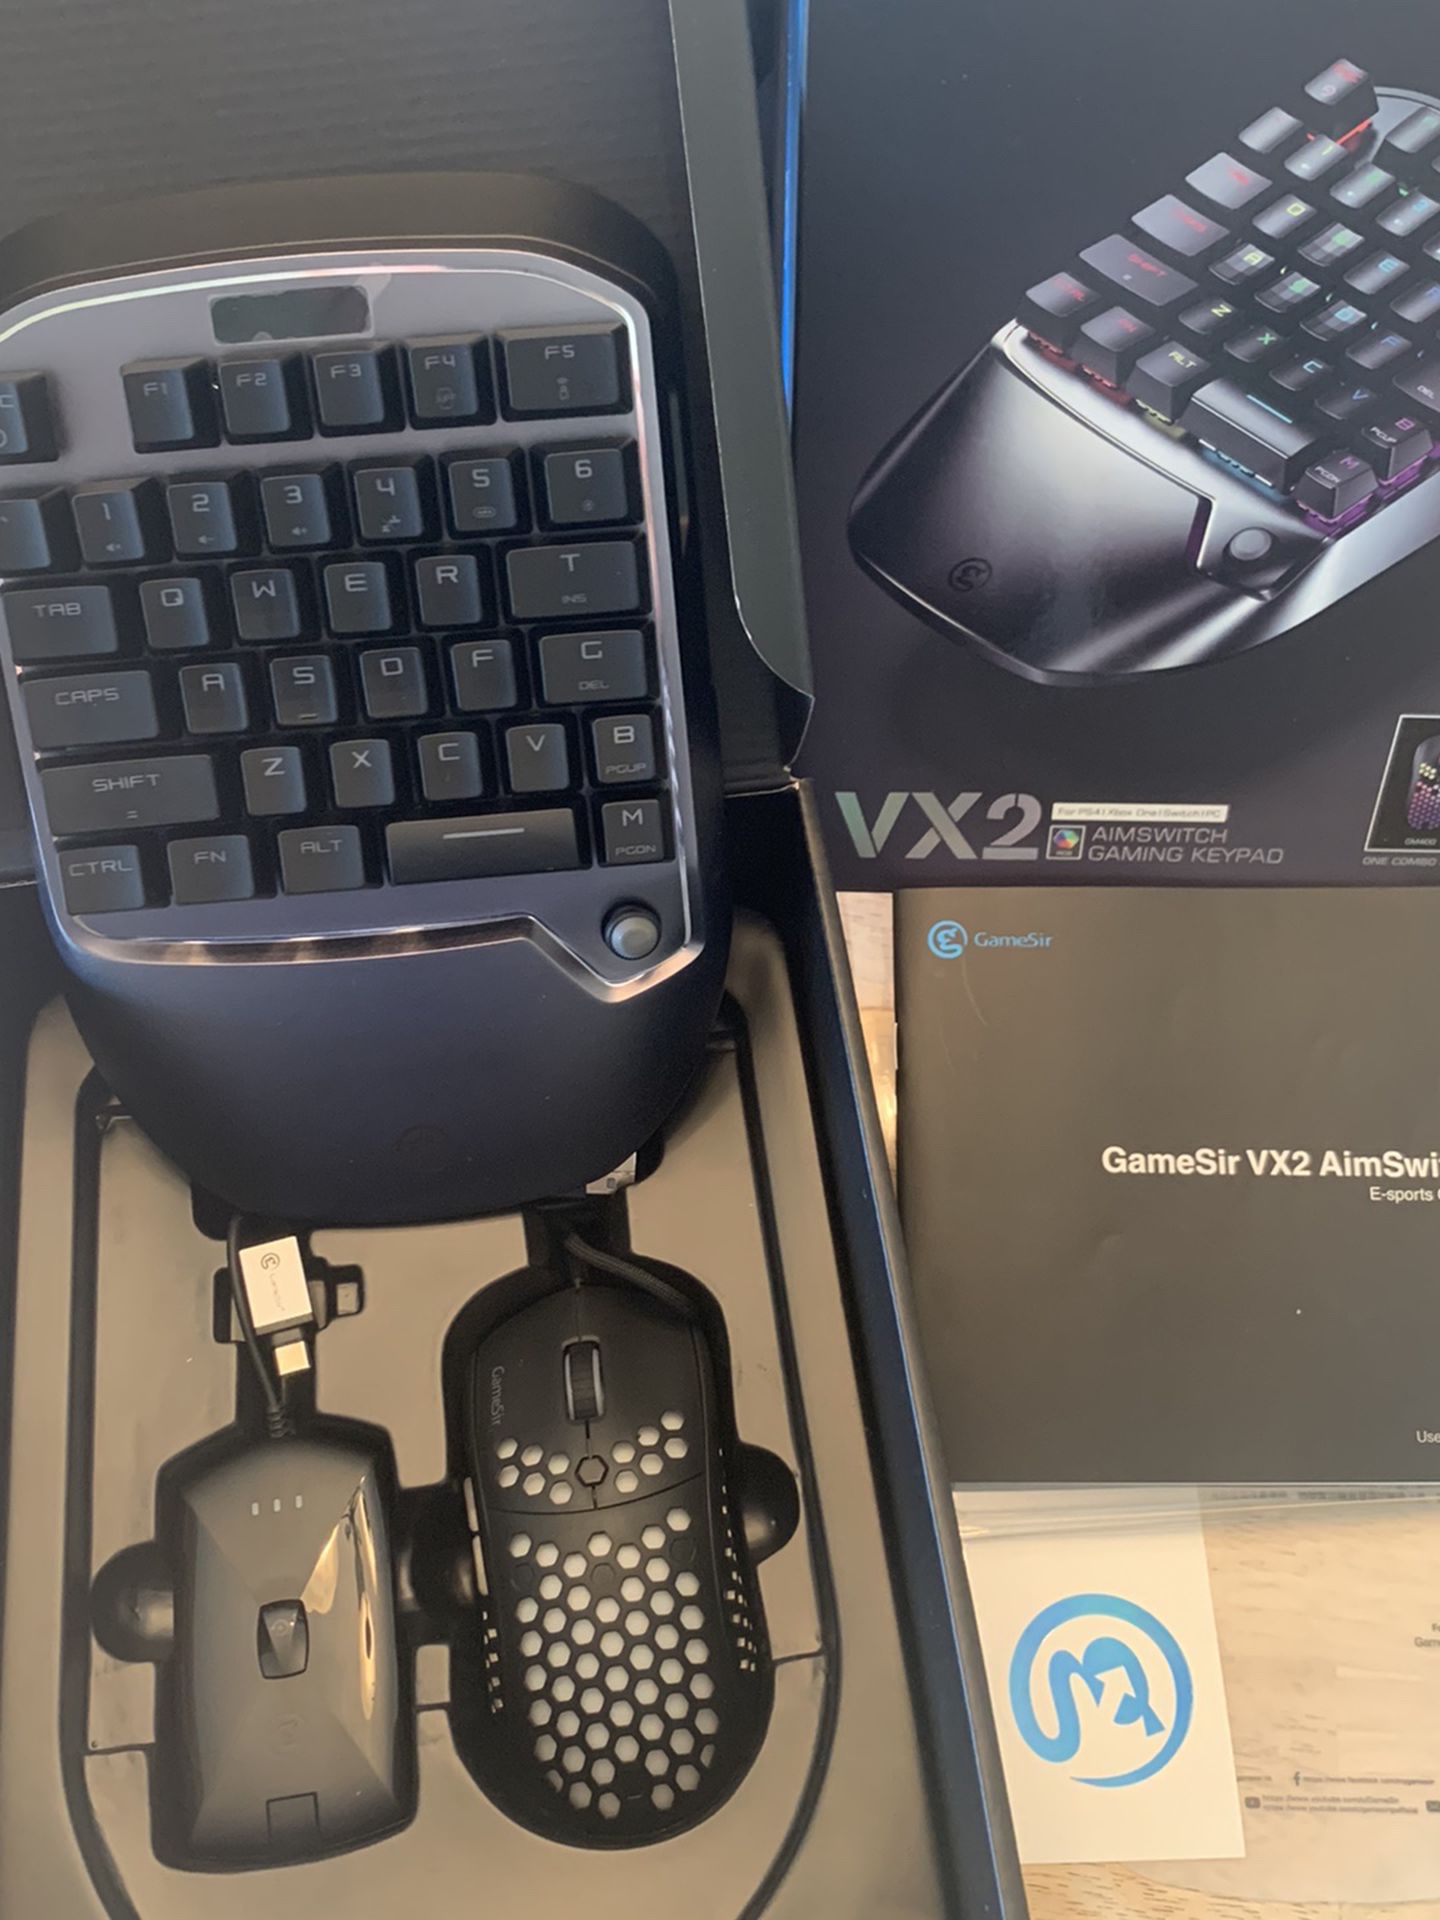 New in box GameSir VX2 aimswitch gaming keypad